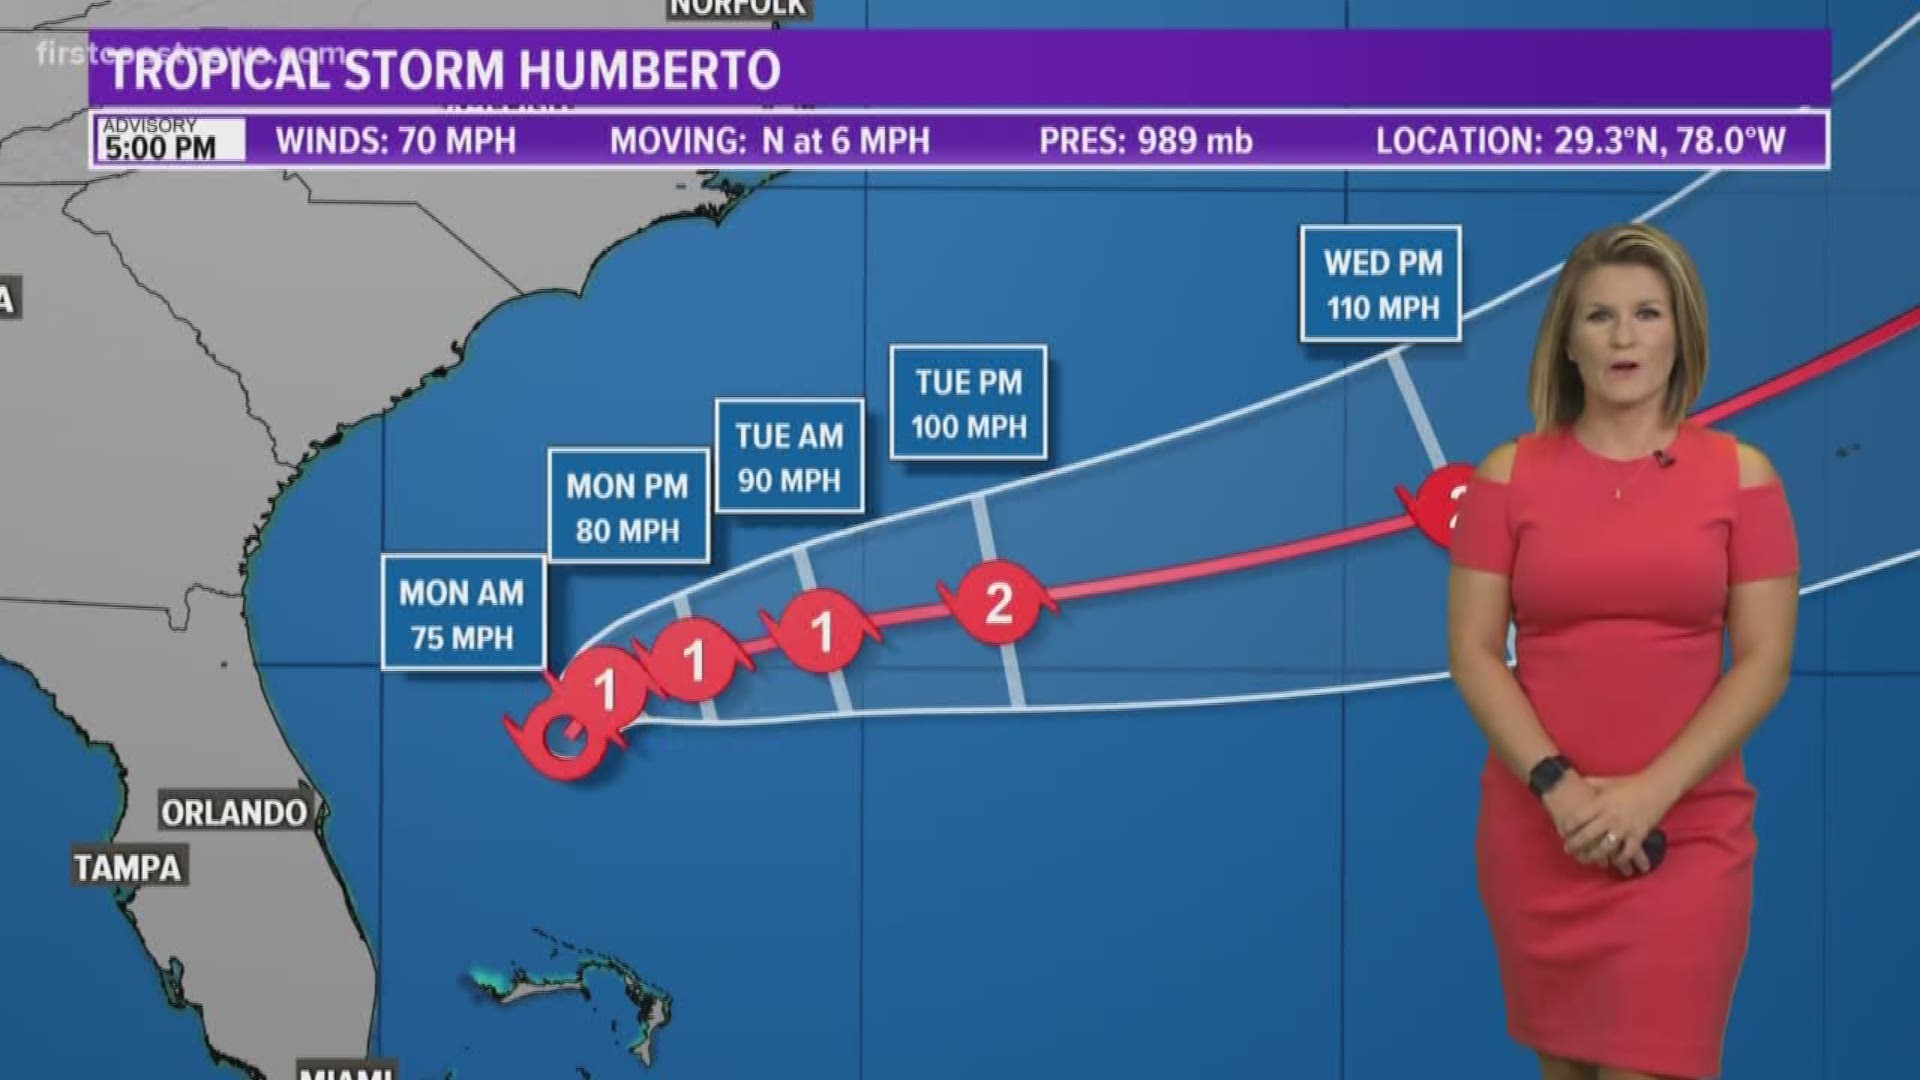 5 P.M. ADVISORY -- Humberto continues to strengthen and is close to becoming a hurricane. Interests in Bermuda should monitor this storm's progress.